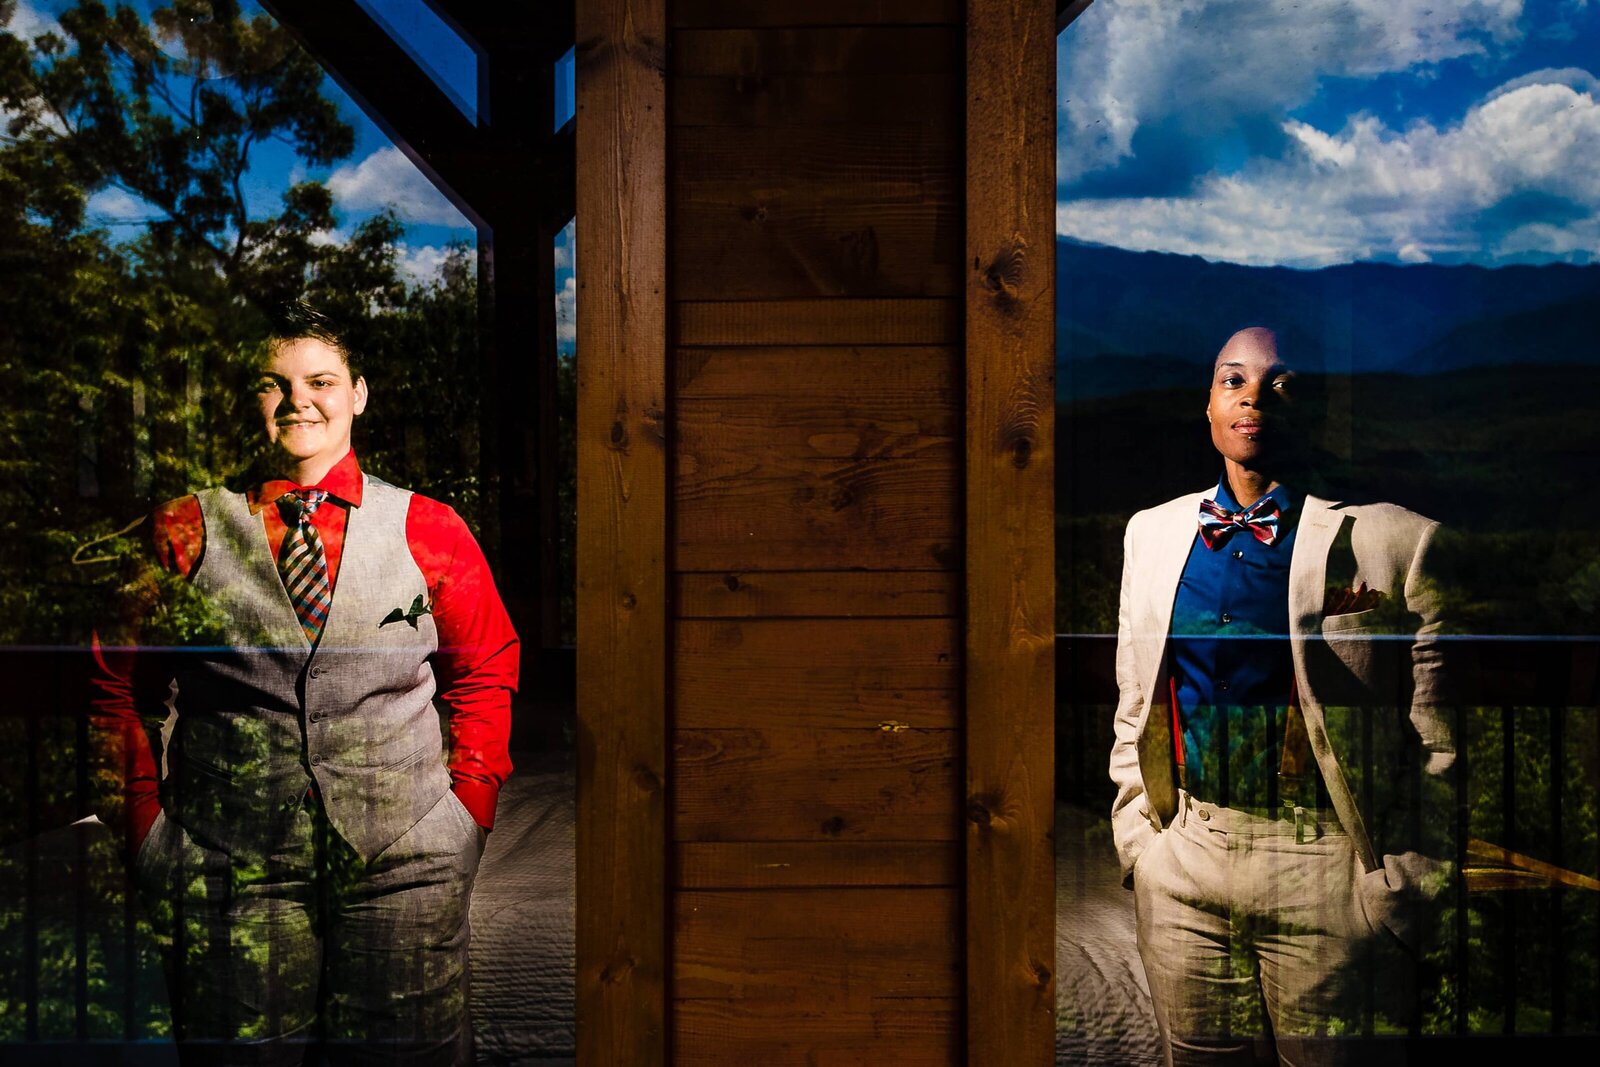 creative wedding photo of a same-sex couple standing behind windows, with the mountains reflected in the glass